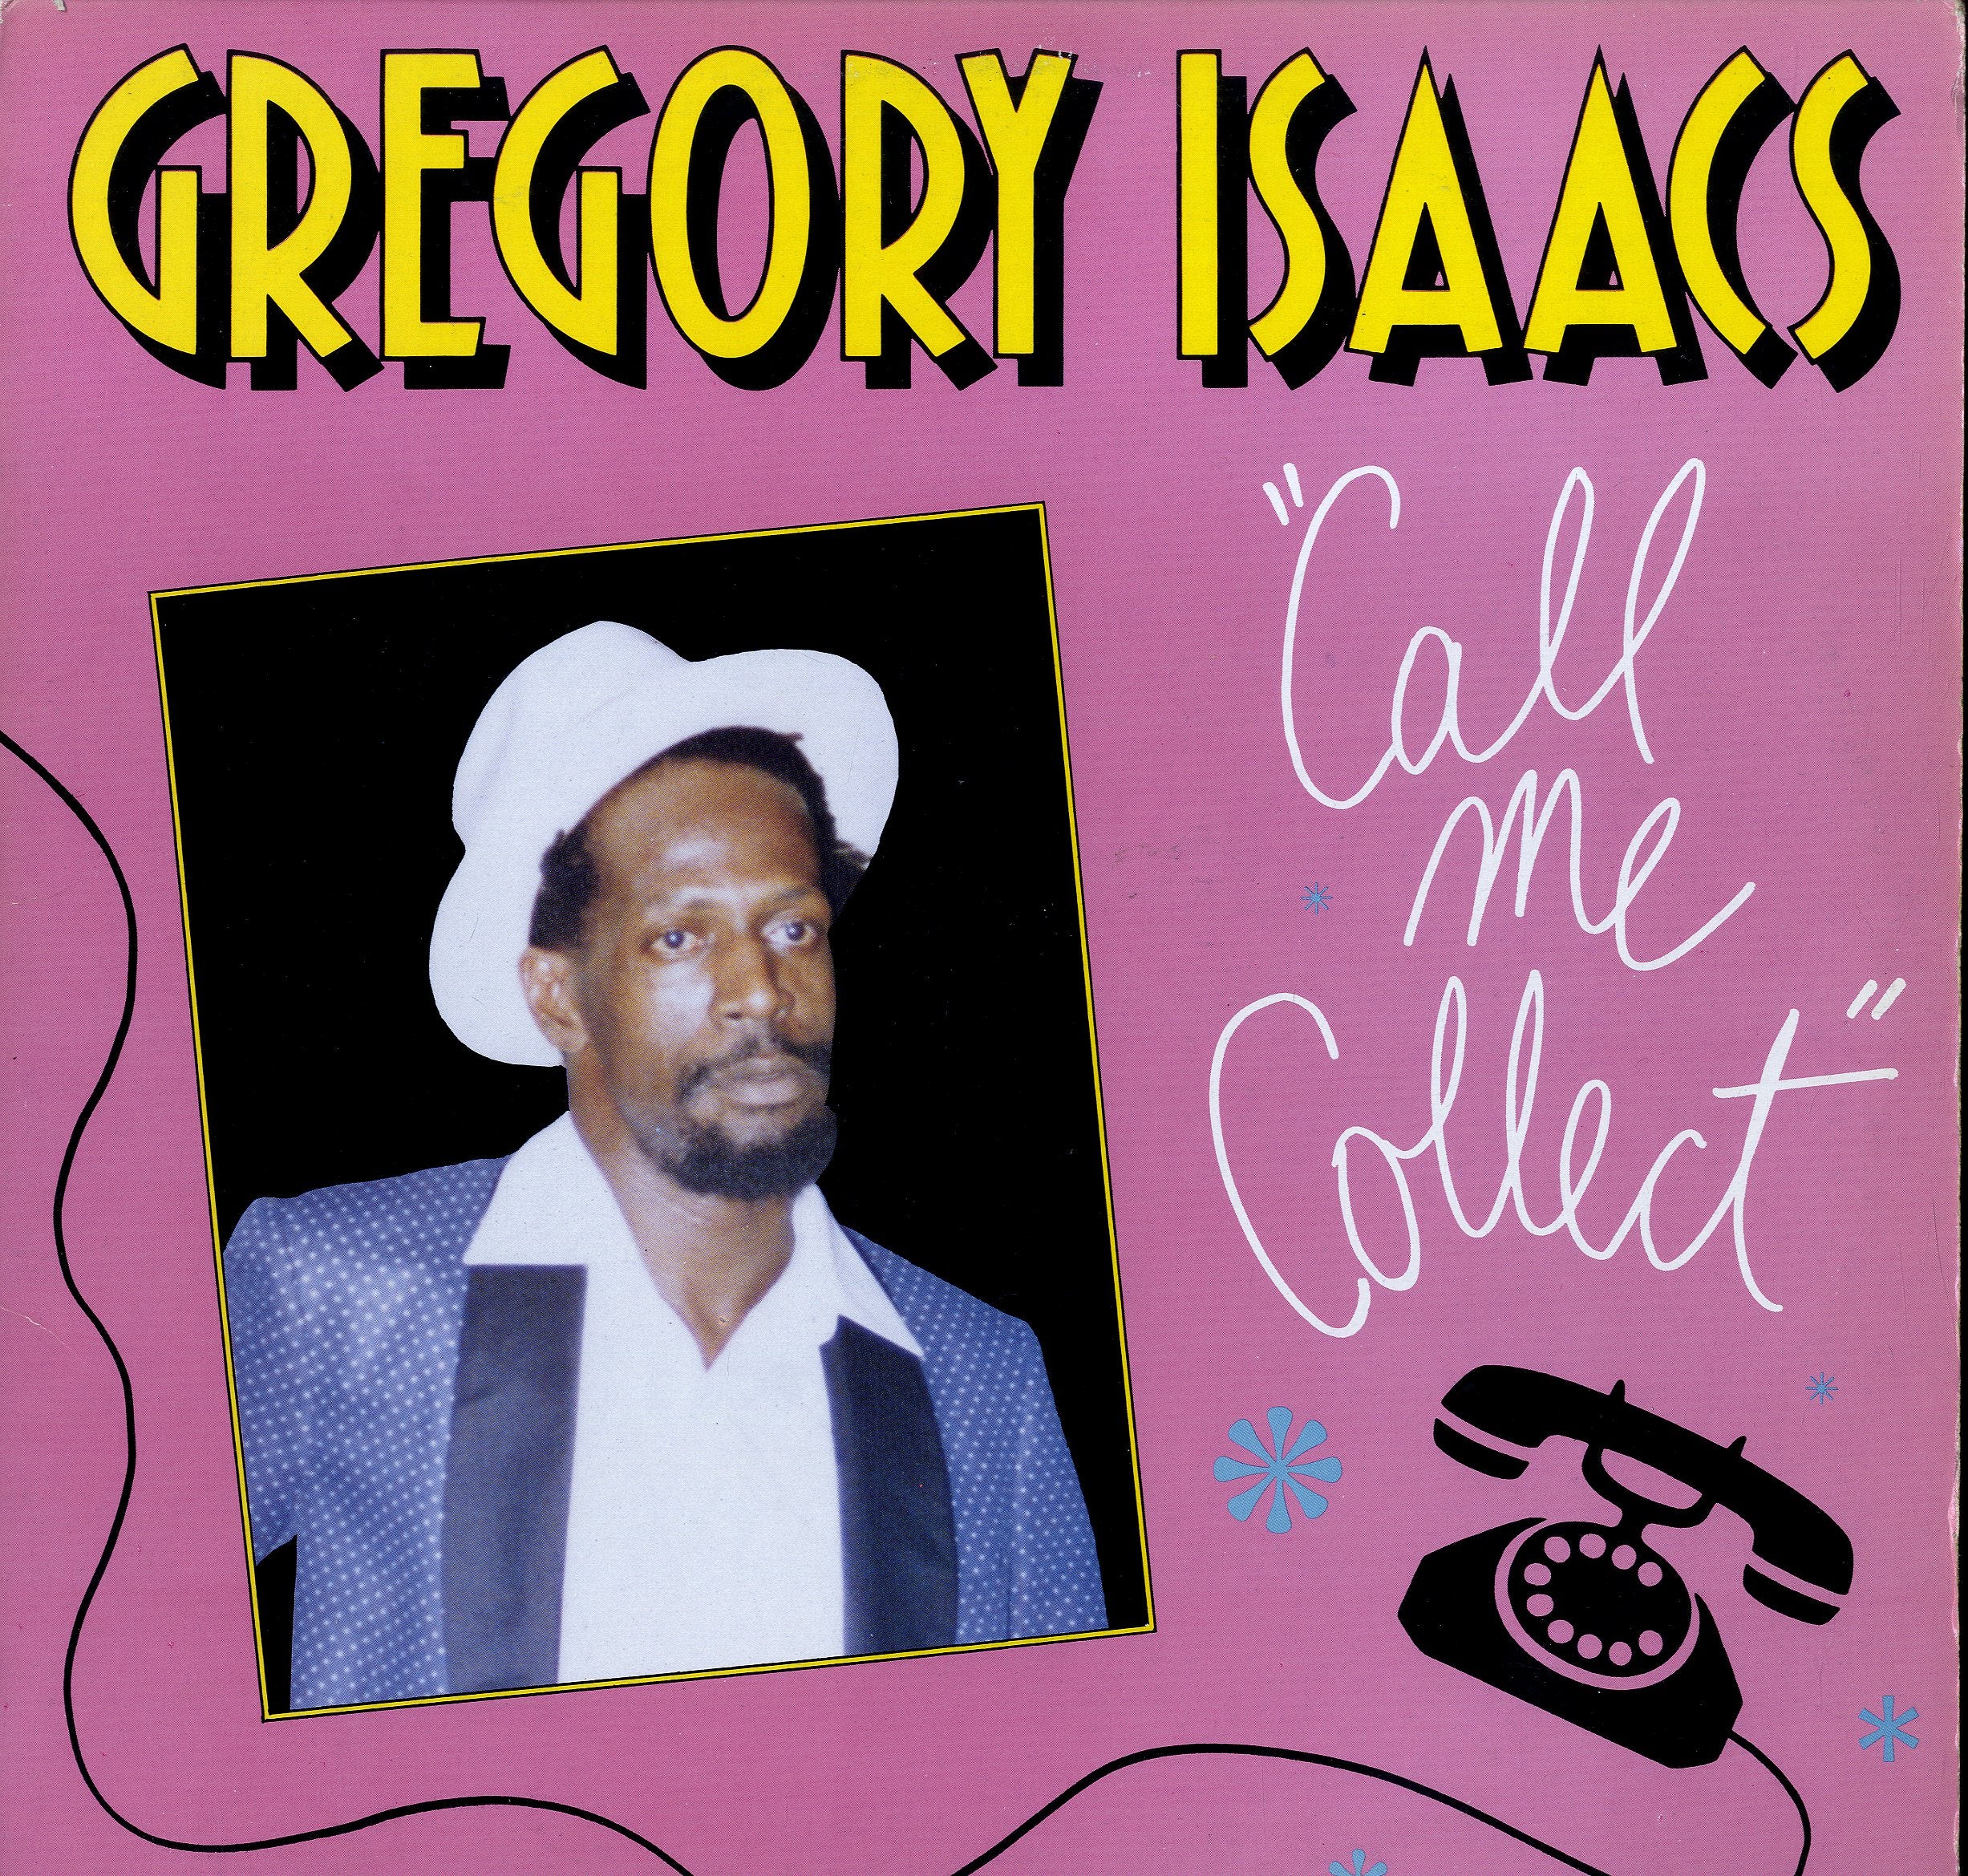 GREGORY ISAACS [Call Me Collect]